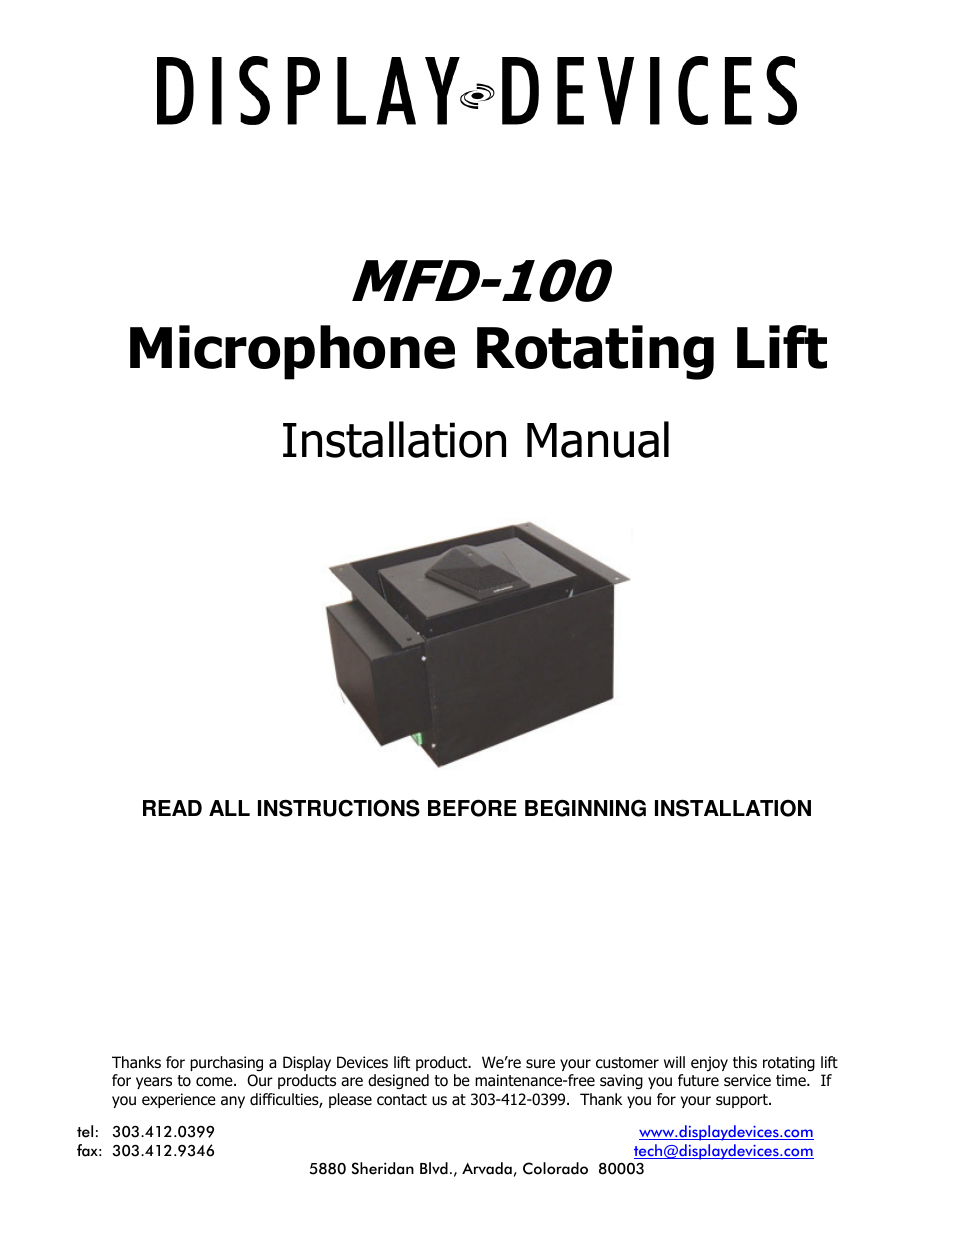 MFD-100 Microphone Table Lift